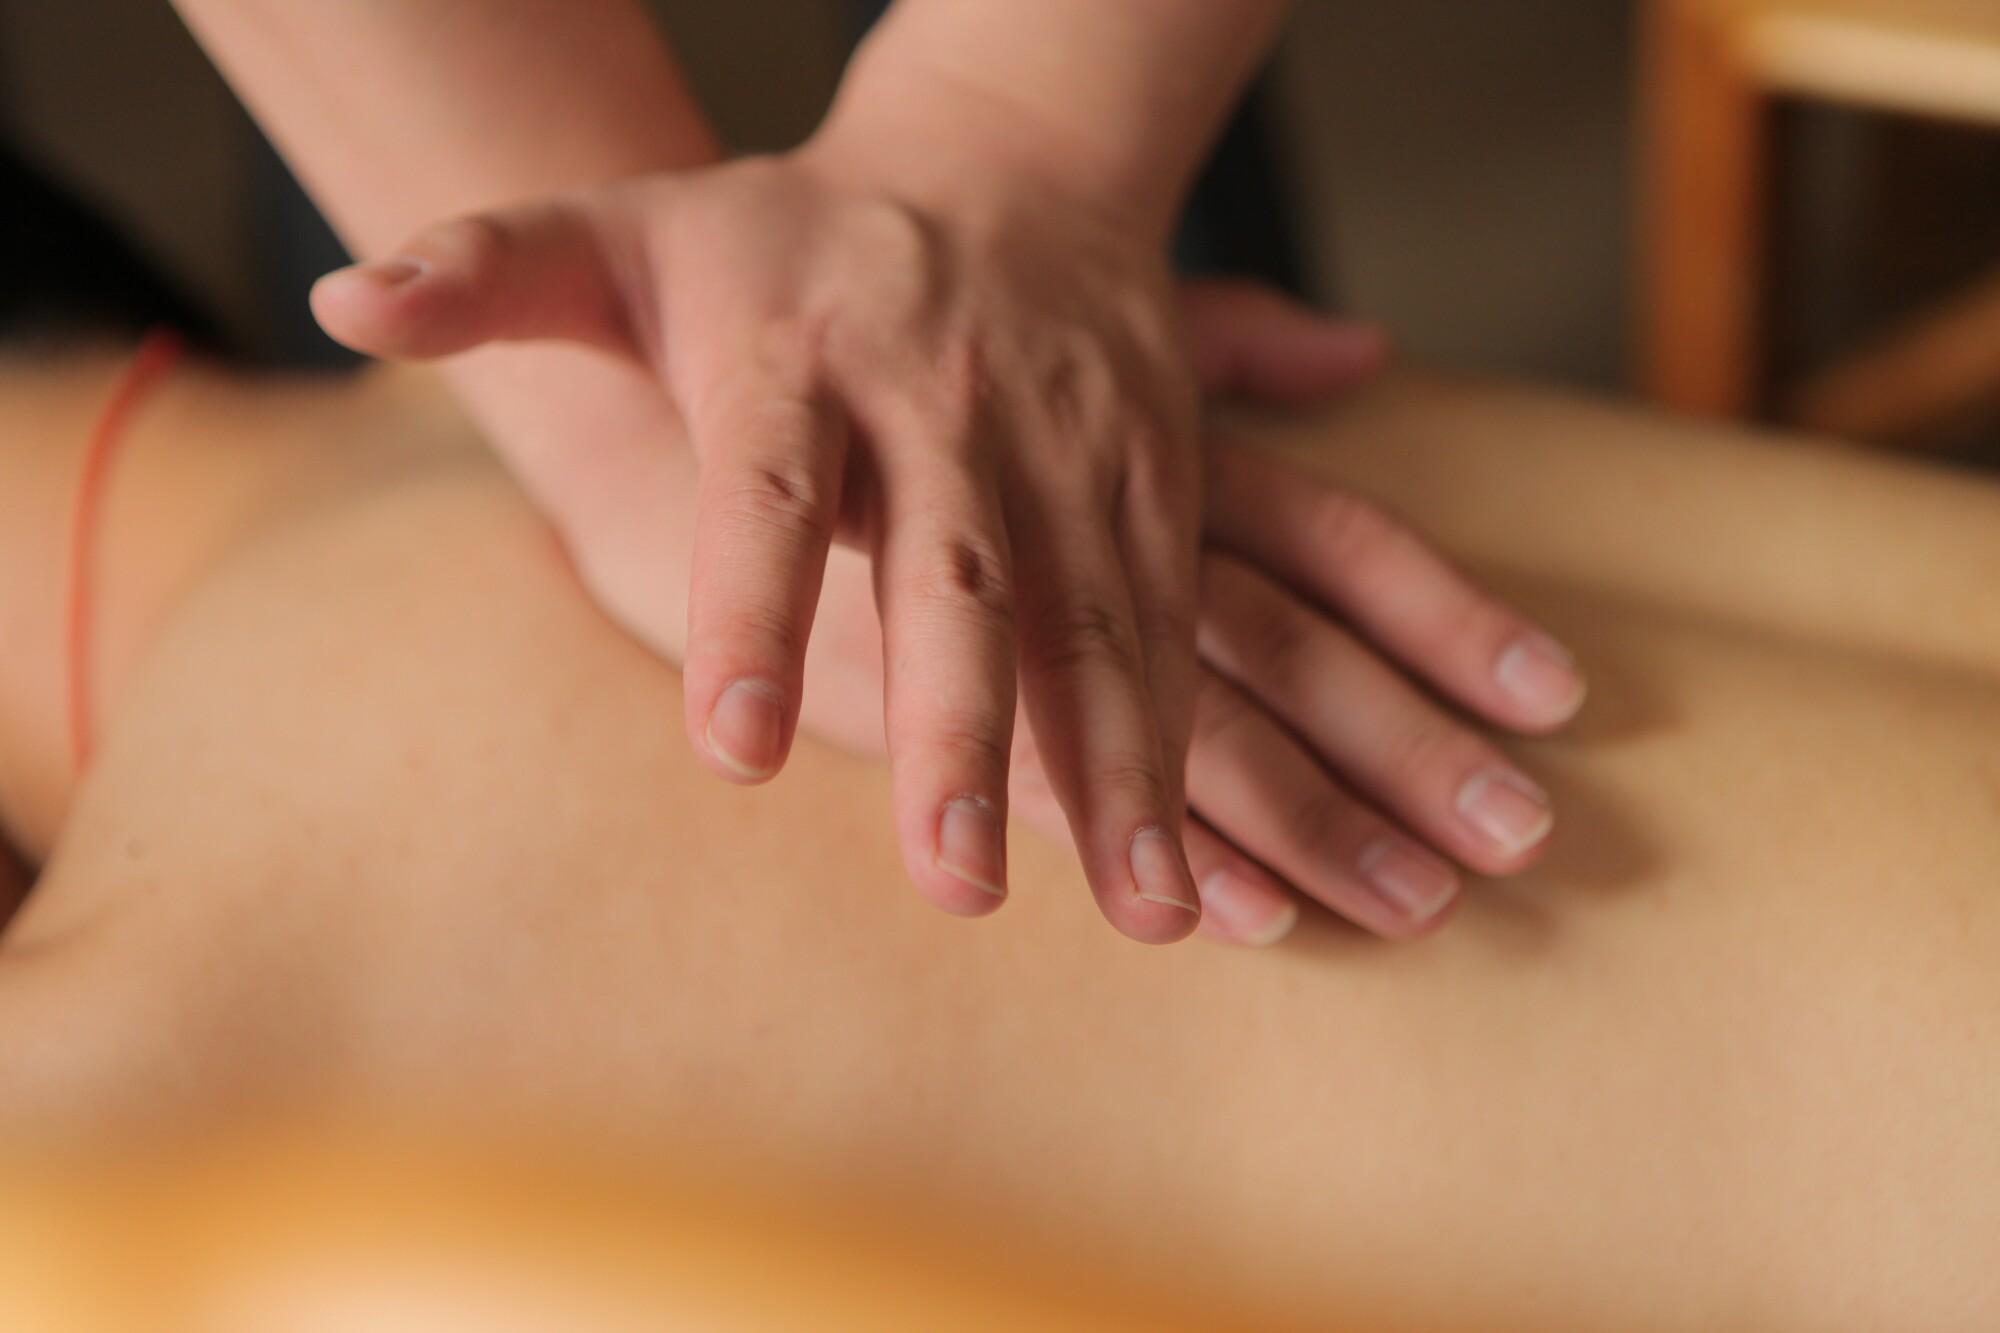 There are many different beautiful types of massage techniques, and finding the right one that works best for your body is pure bliss.